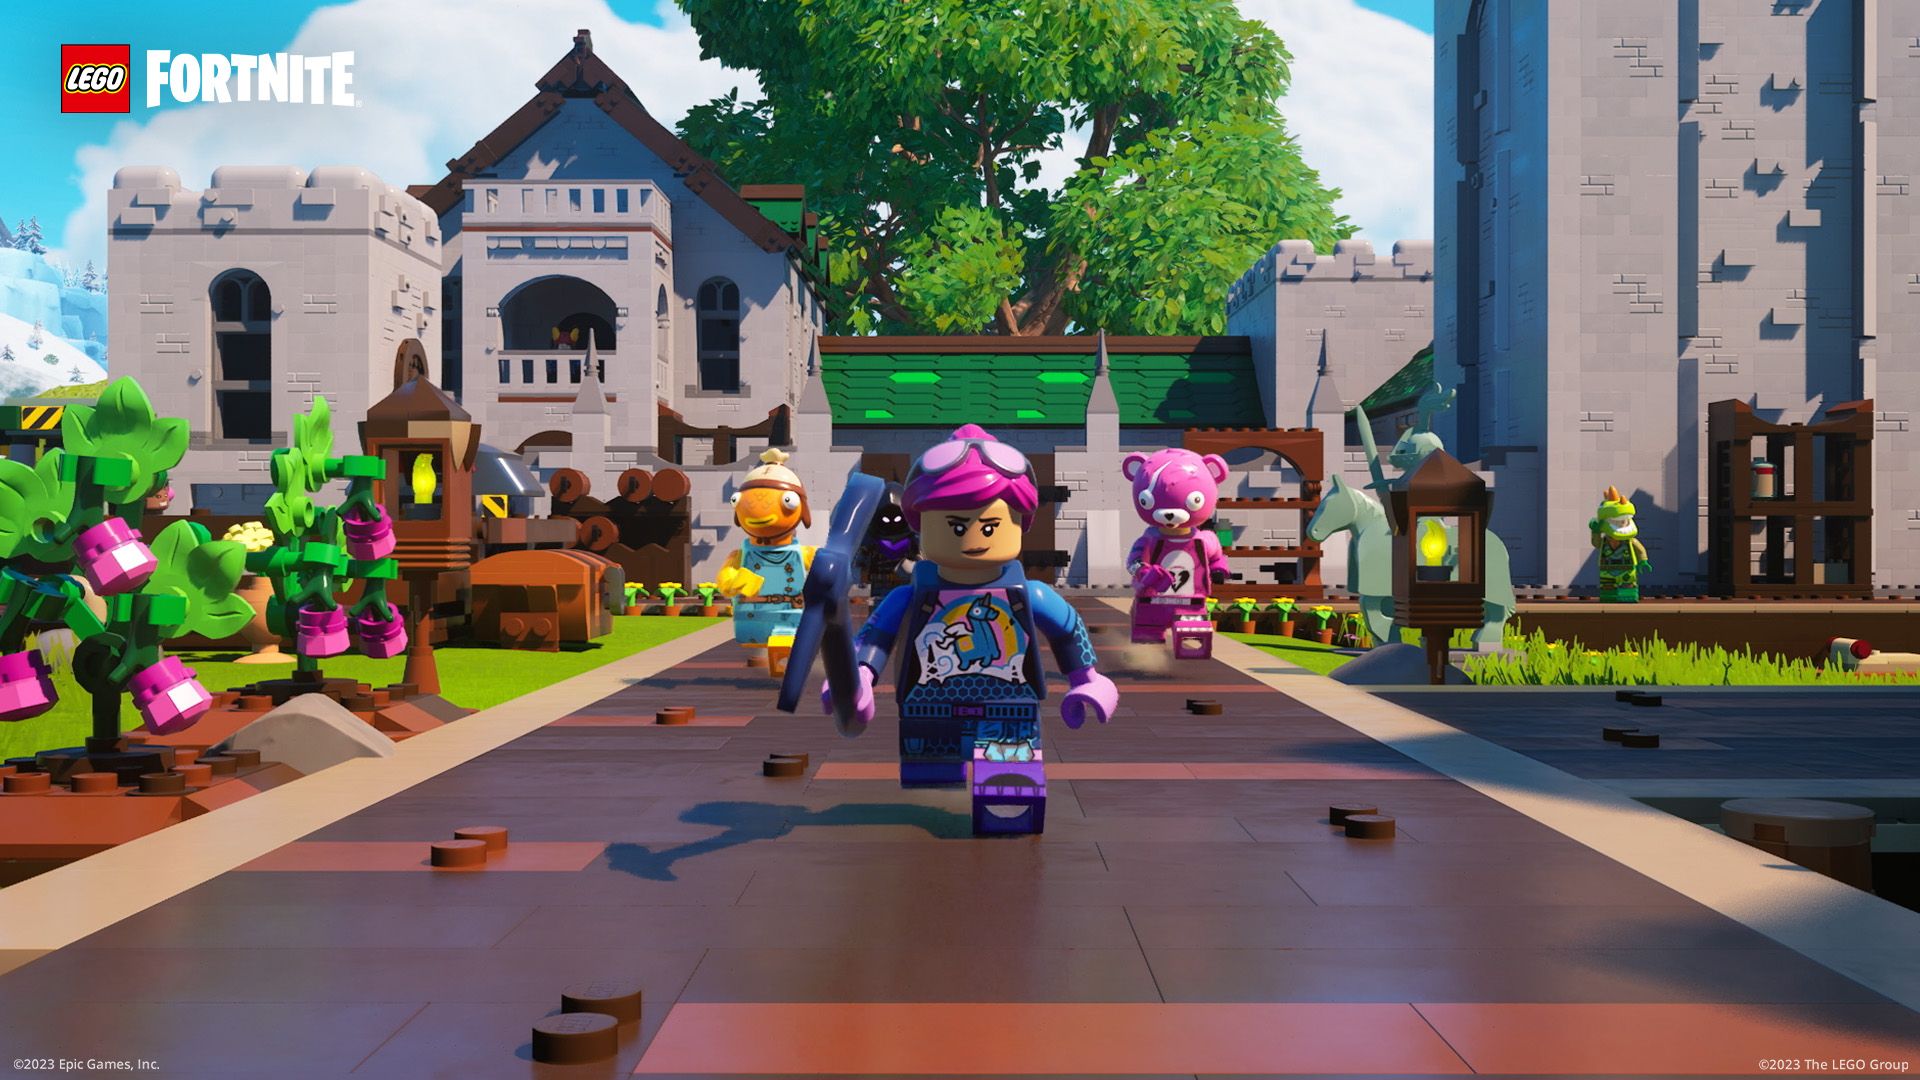 Video game screenshot of Lego characters running away from a castle made of Lego bricks